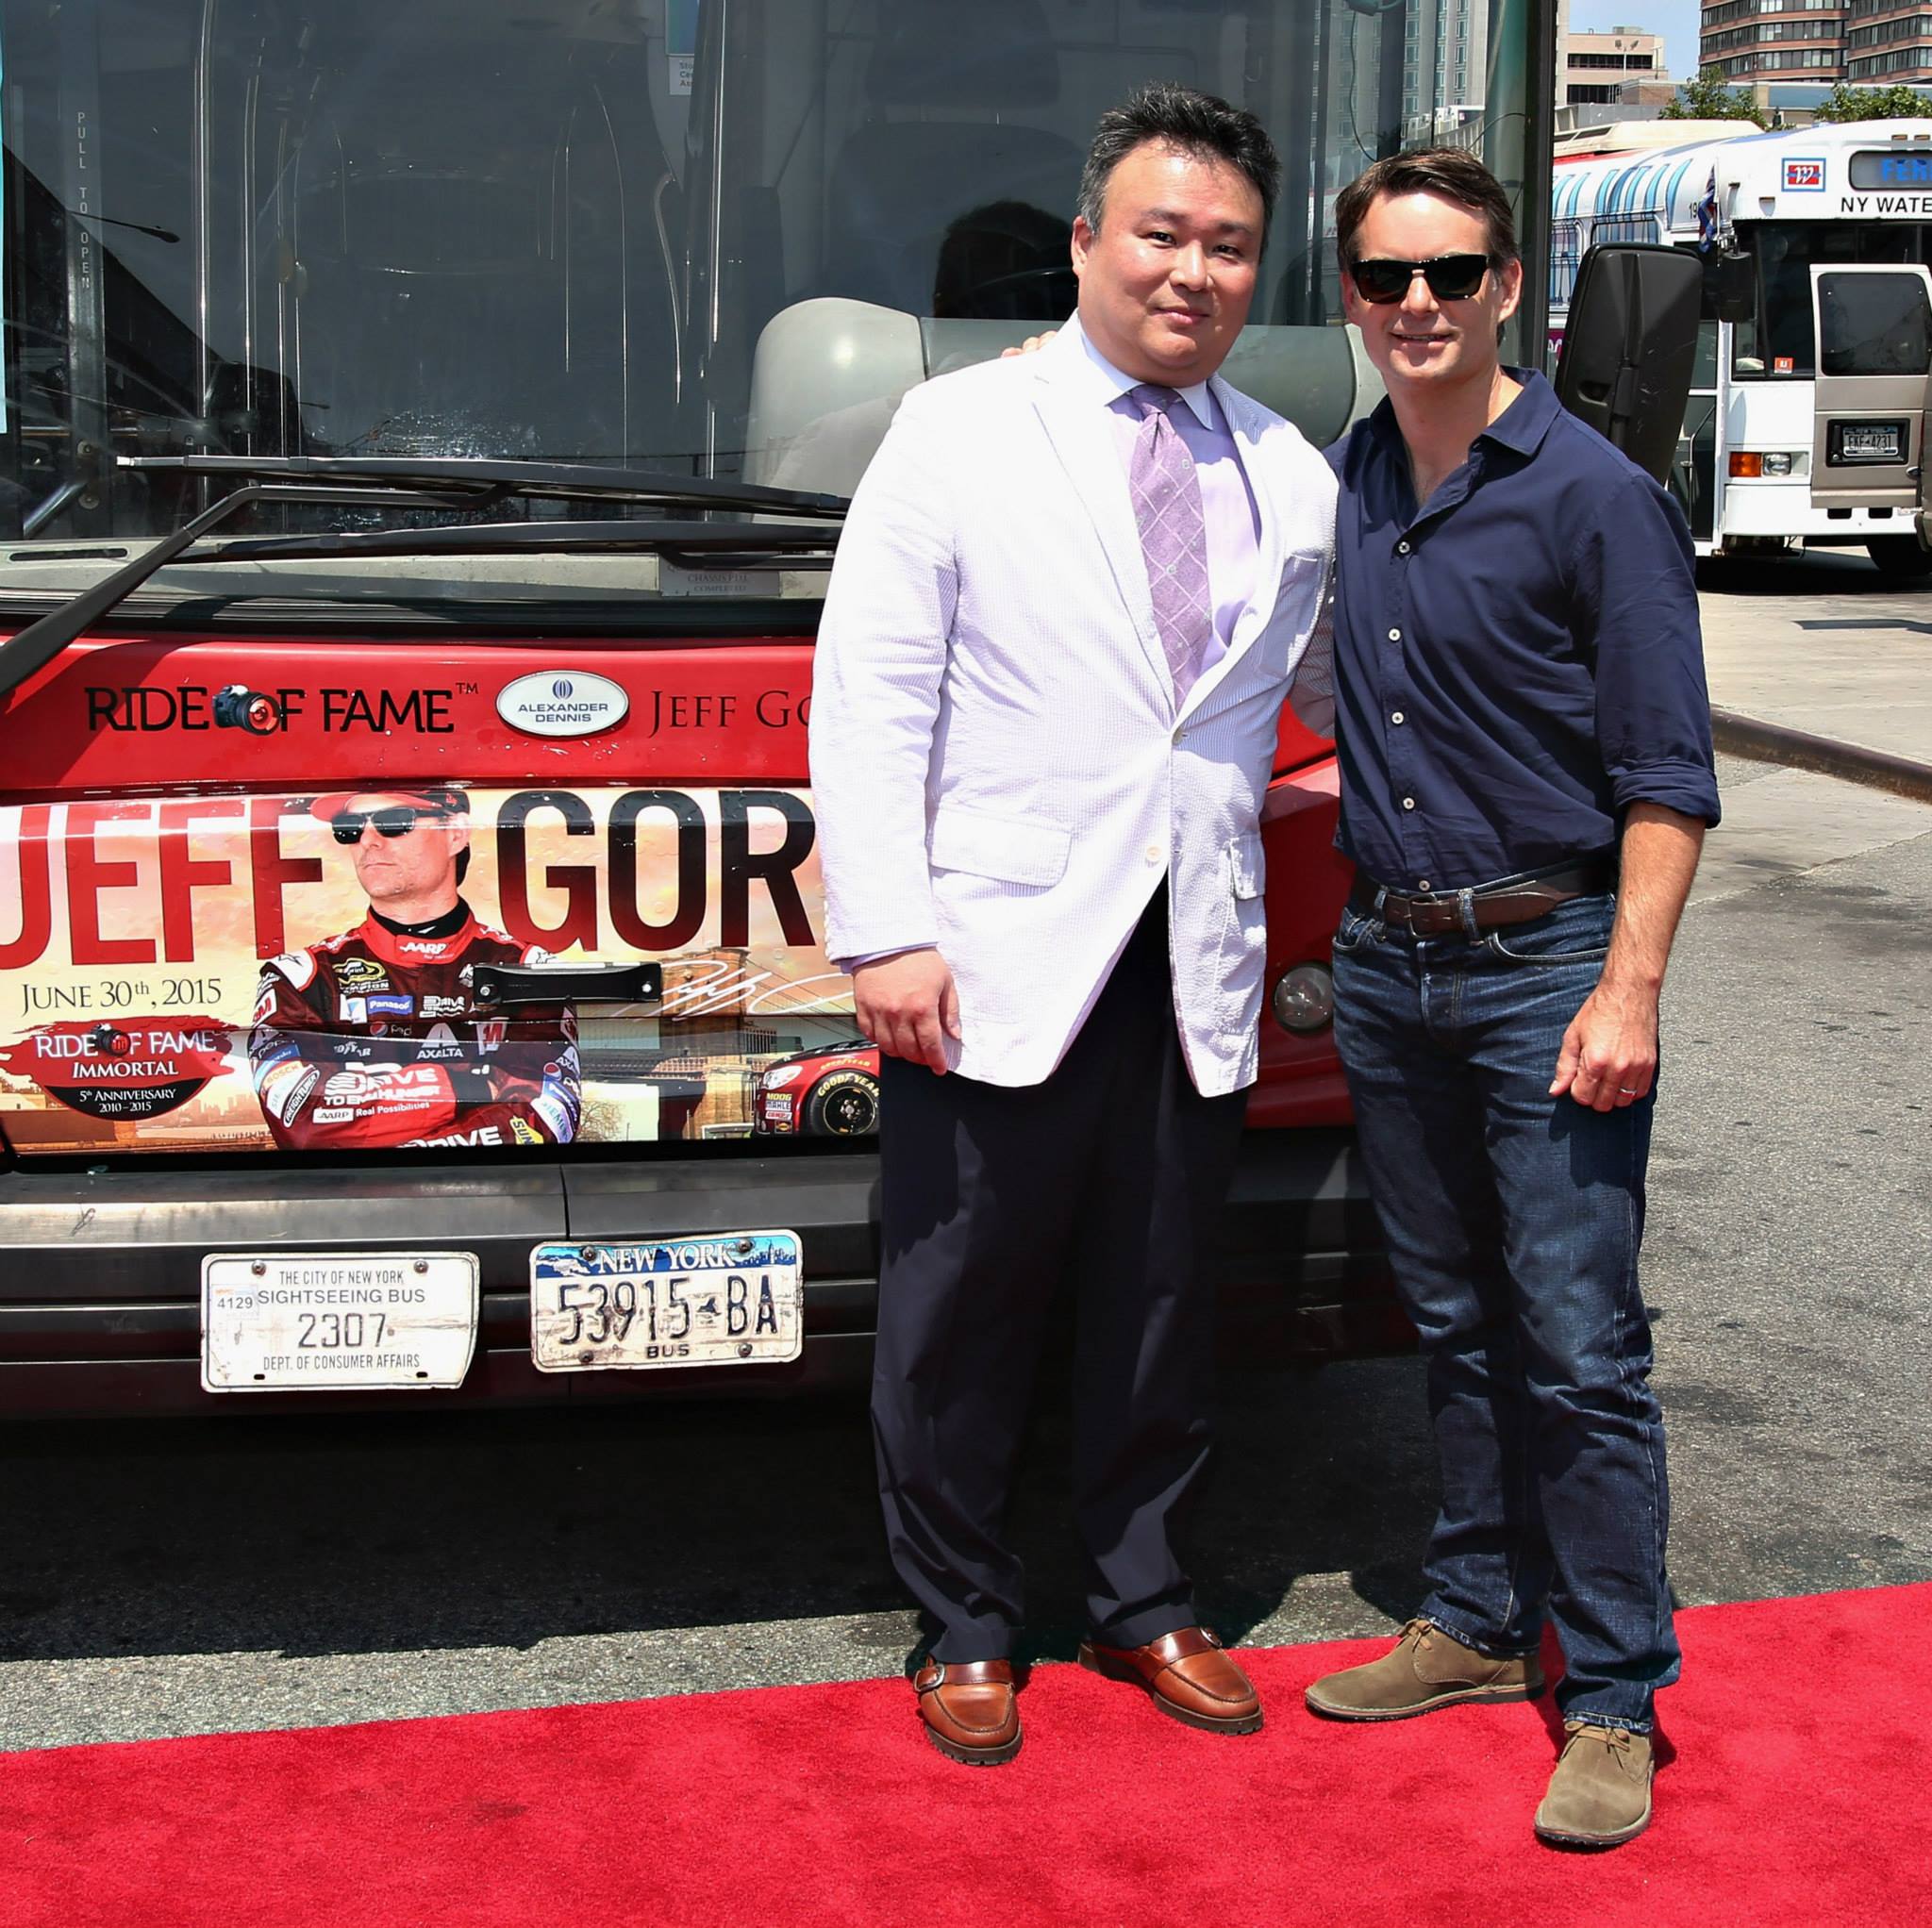 David W. Chien poses with Ride of Fame Honoree Jeff Gordon (June 30th, 2015).